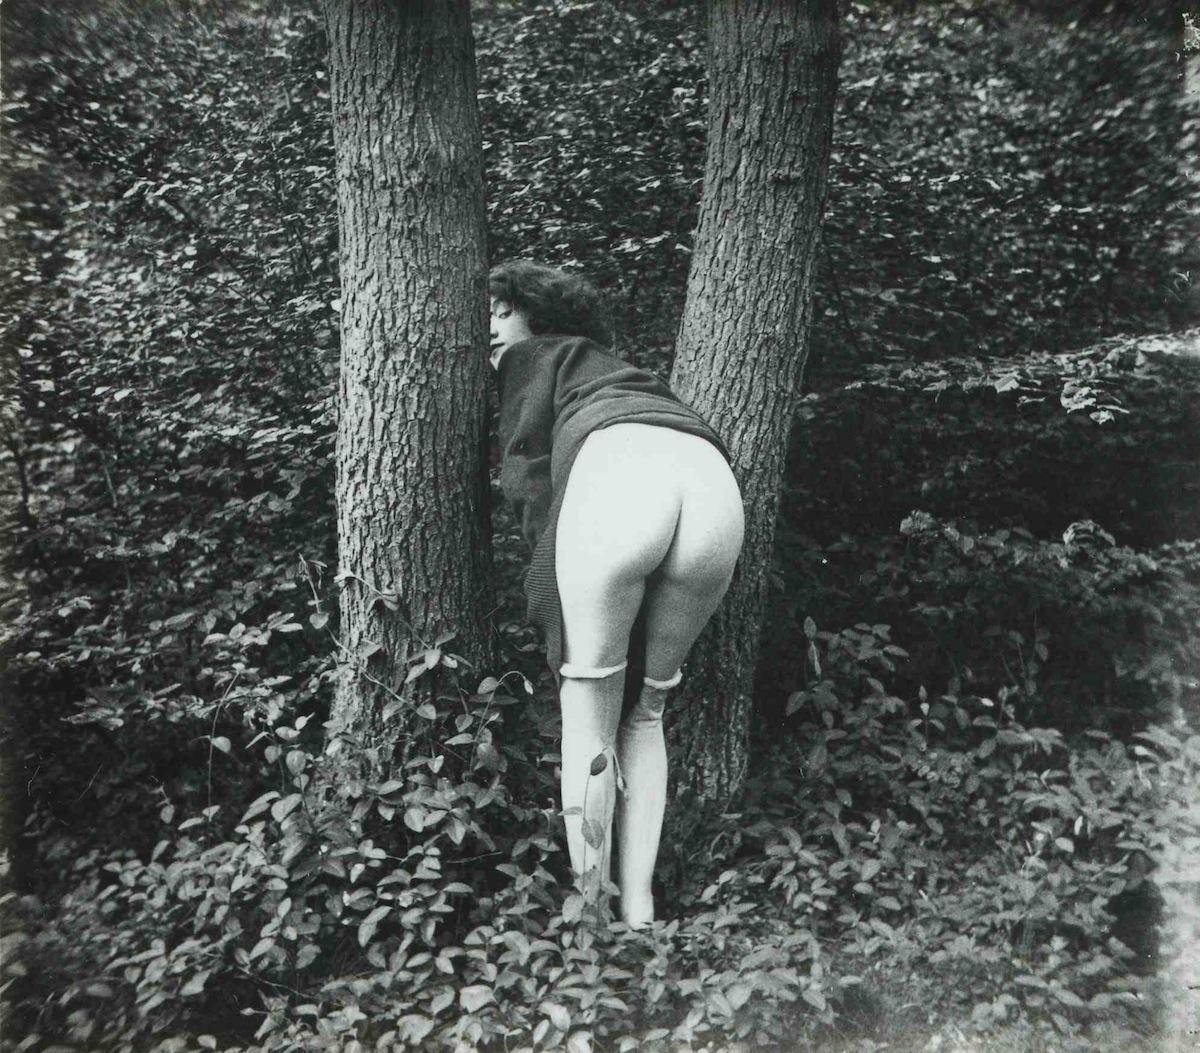 Charming Pornographic Photographs of 1930s French Prostitutes http://bit.ly...